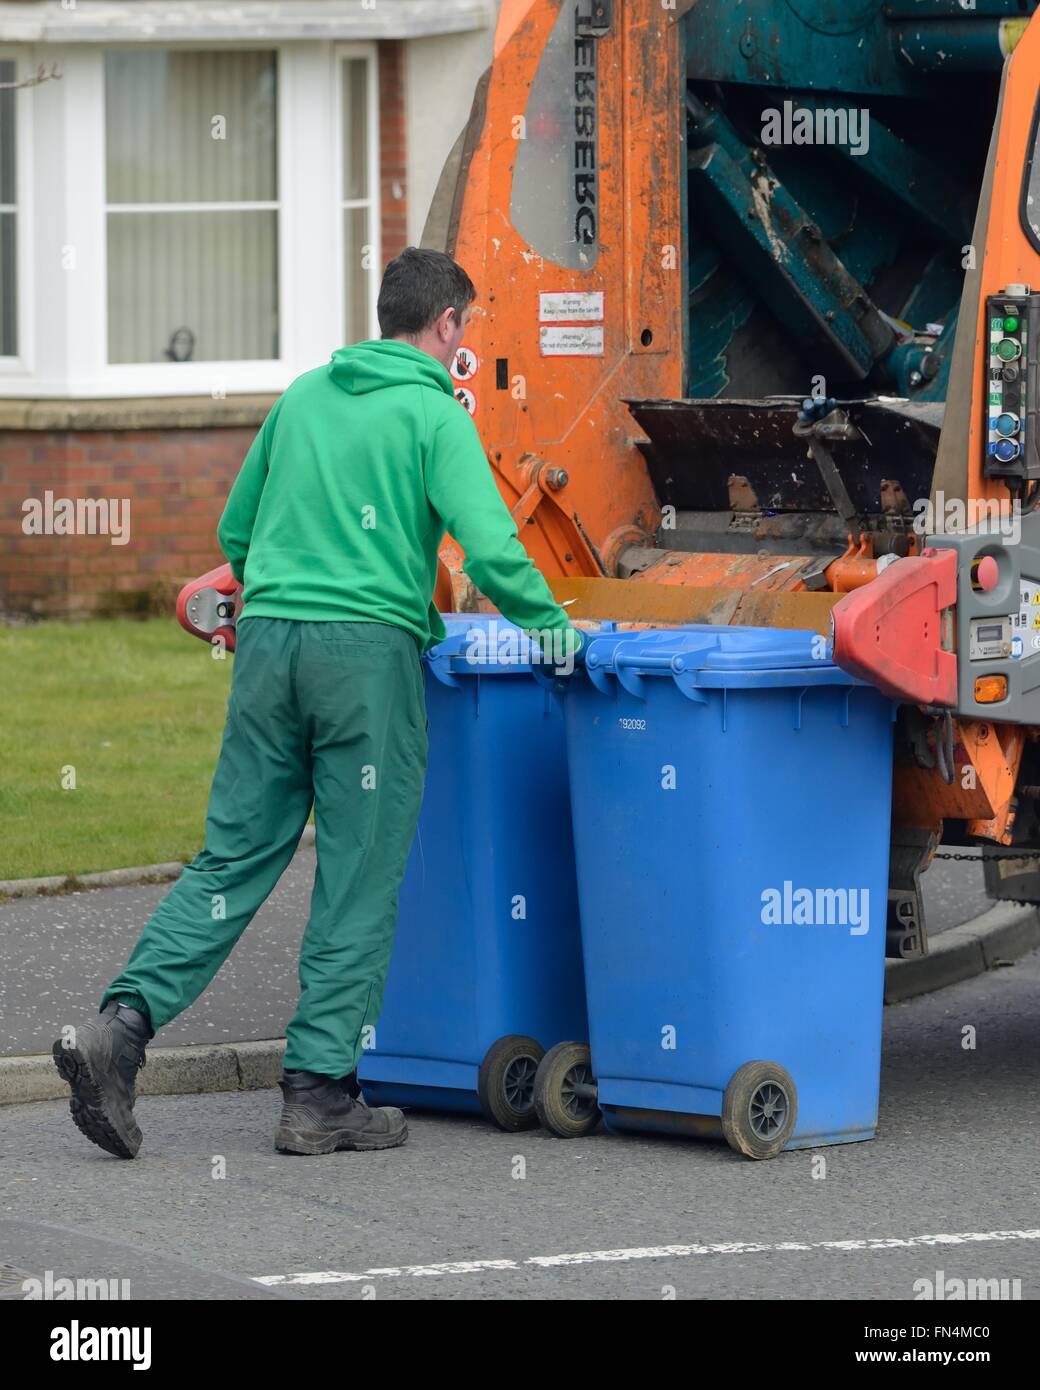 Refuse Collector Stock Photos & Refuse Collector Stock Images - Alamy